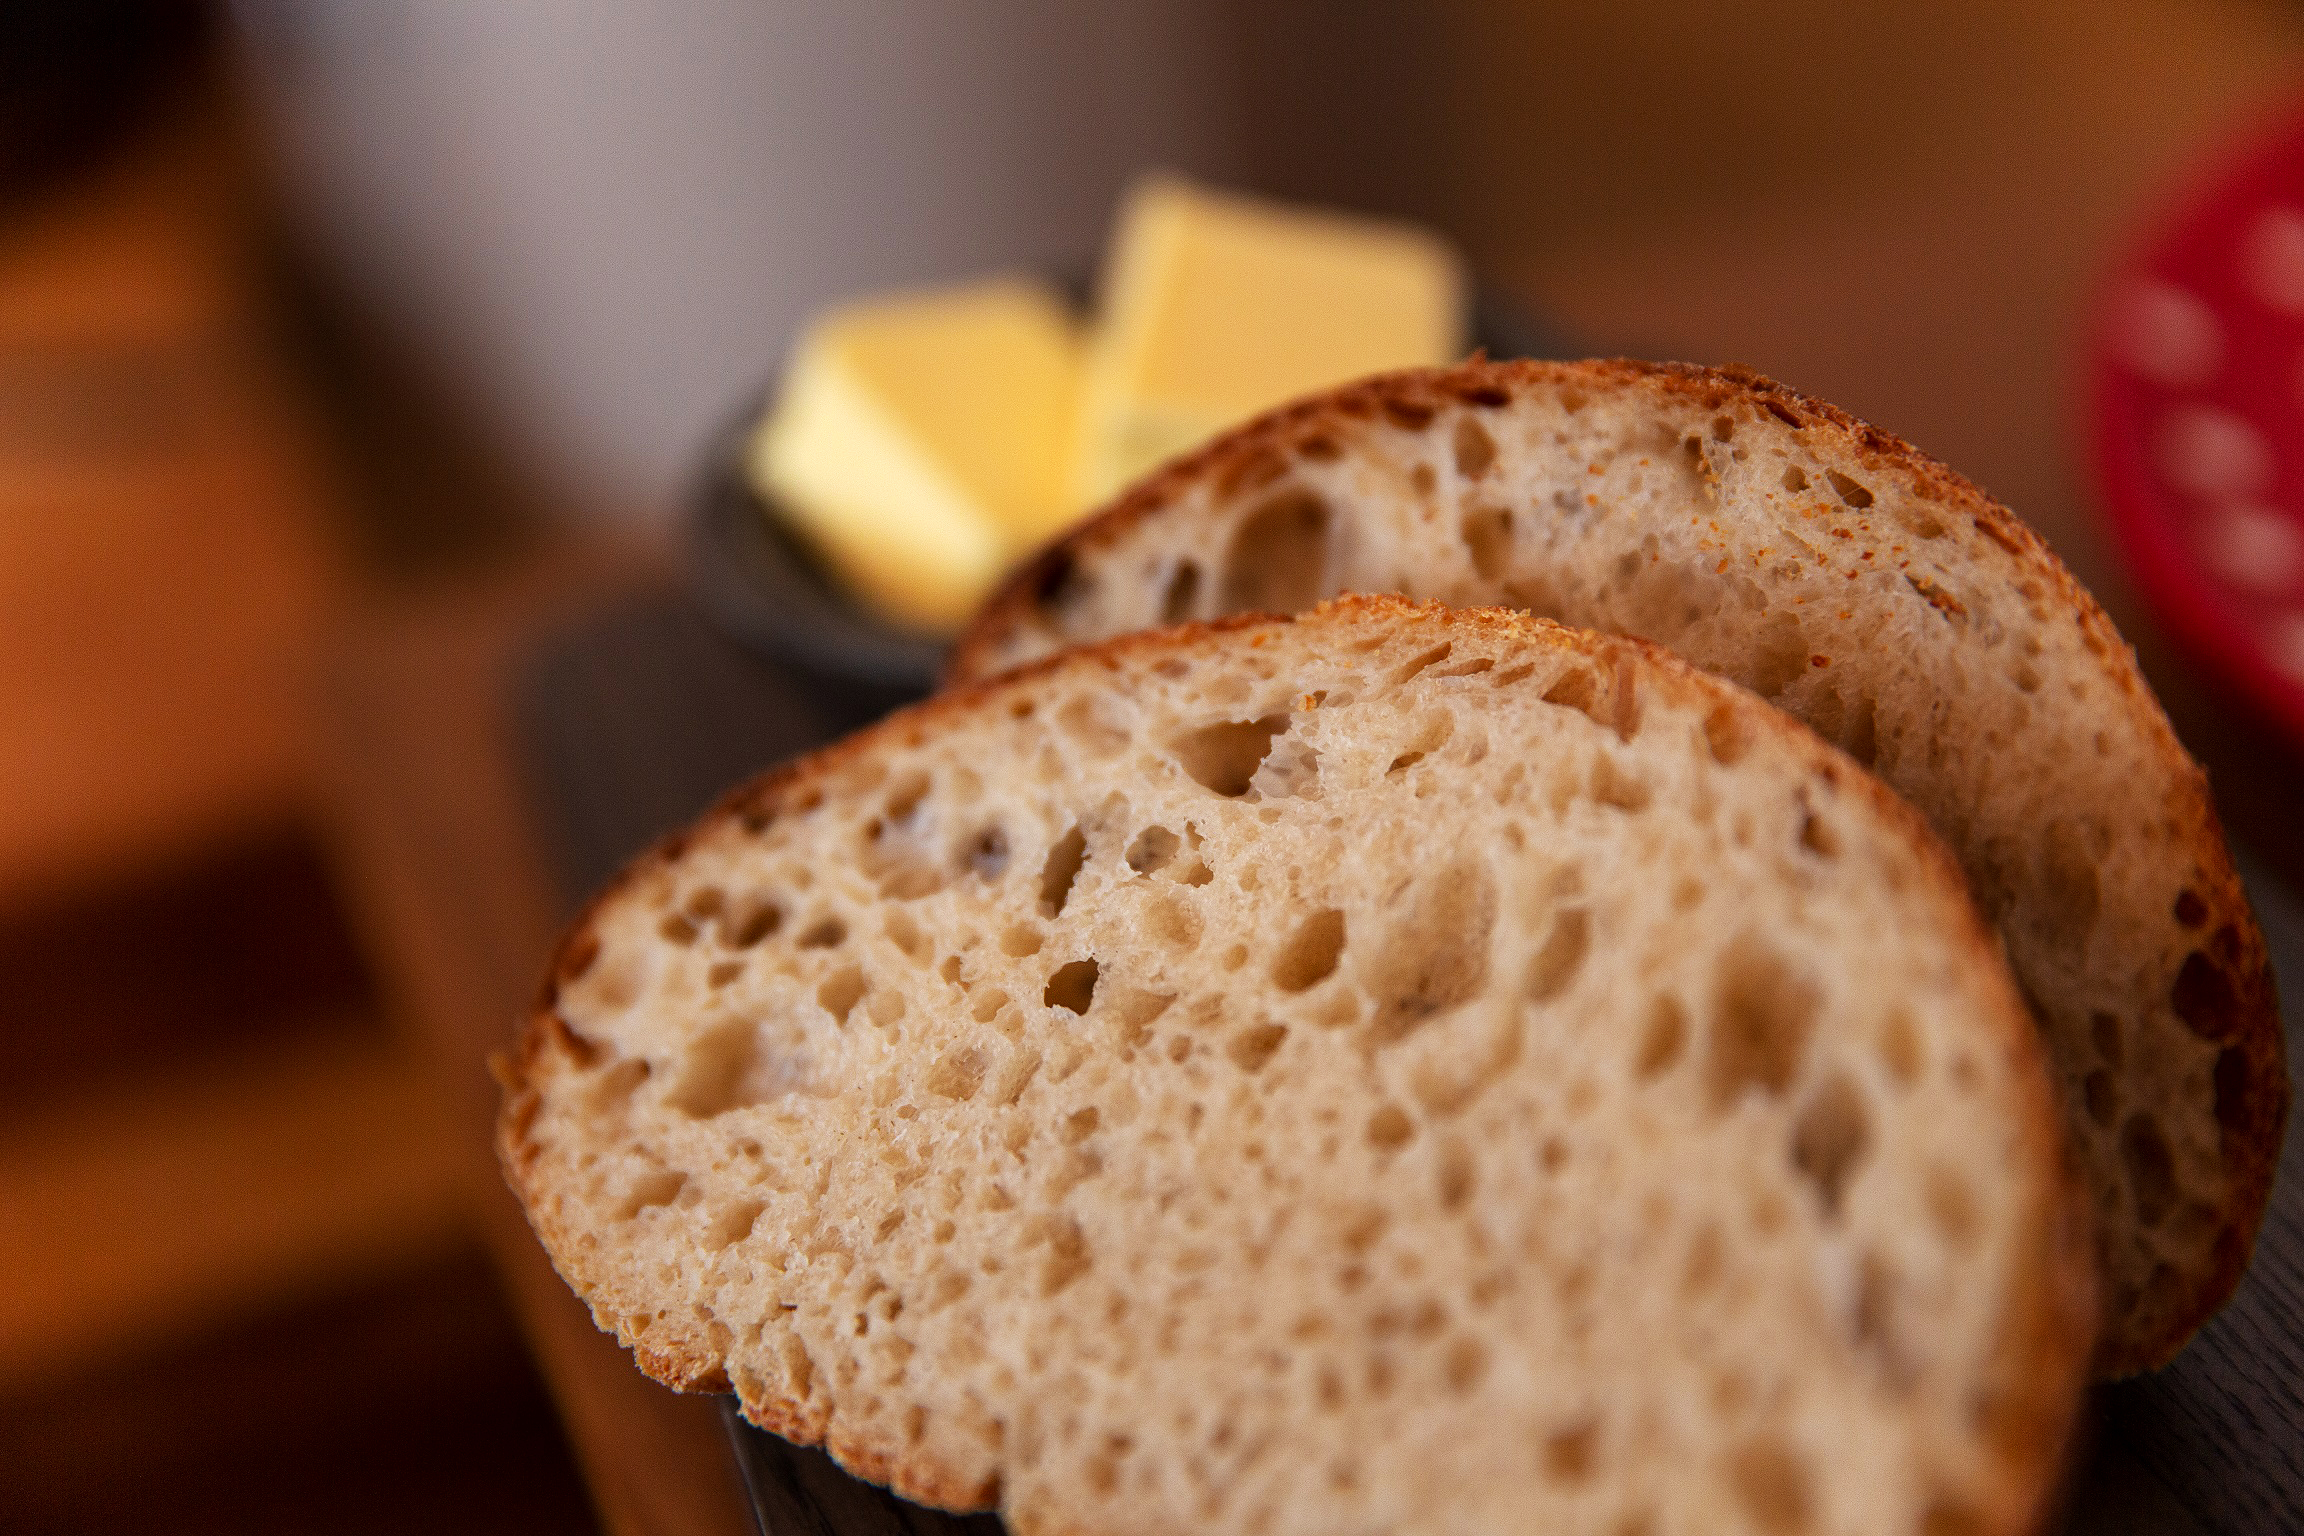 You can learn how to make sourdough as part of your stay